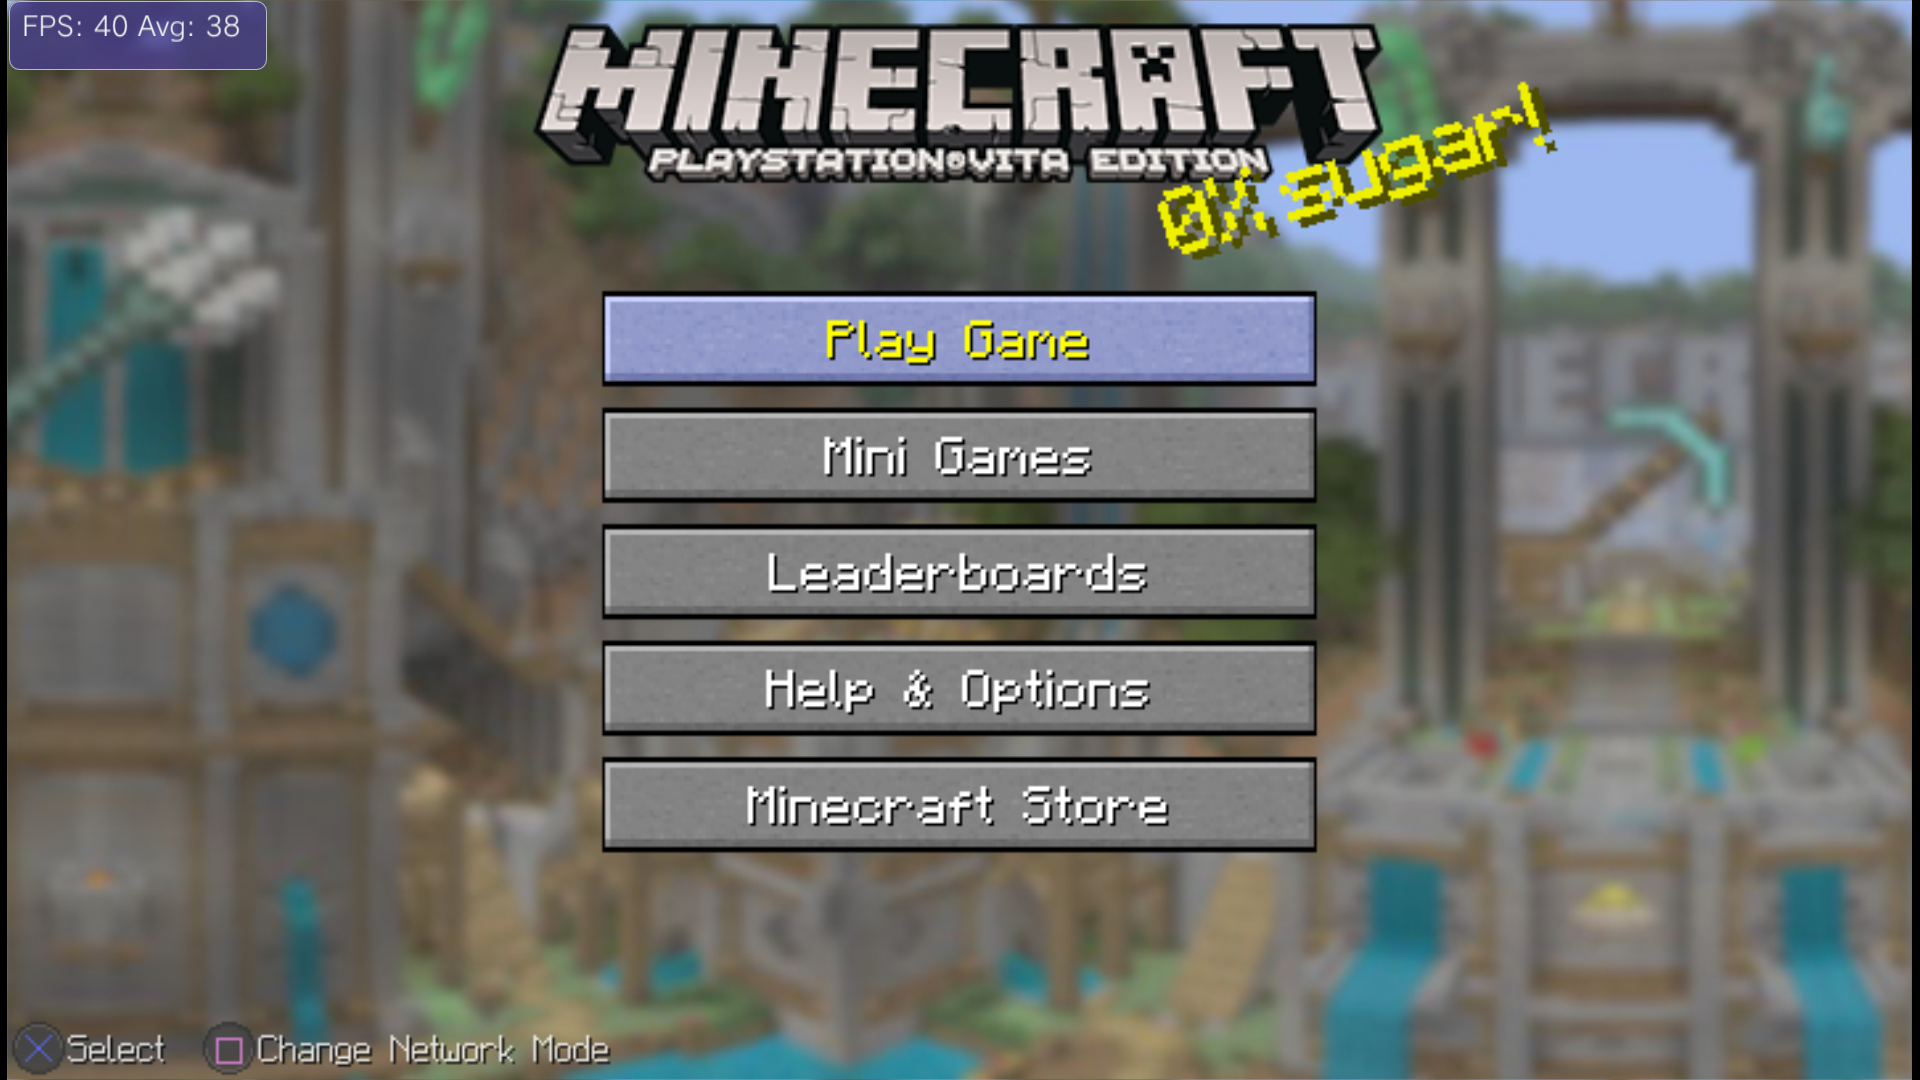 Minecraft: PlayStation 3 Edition Review 